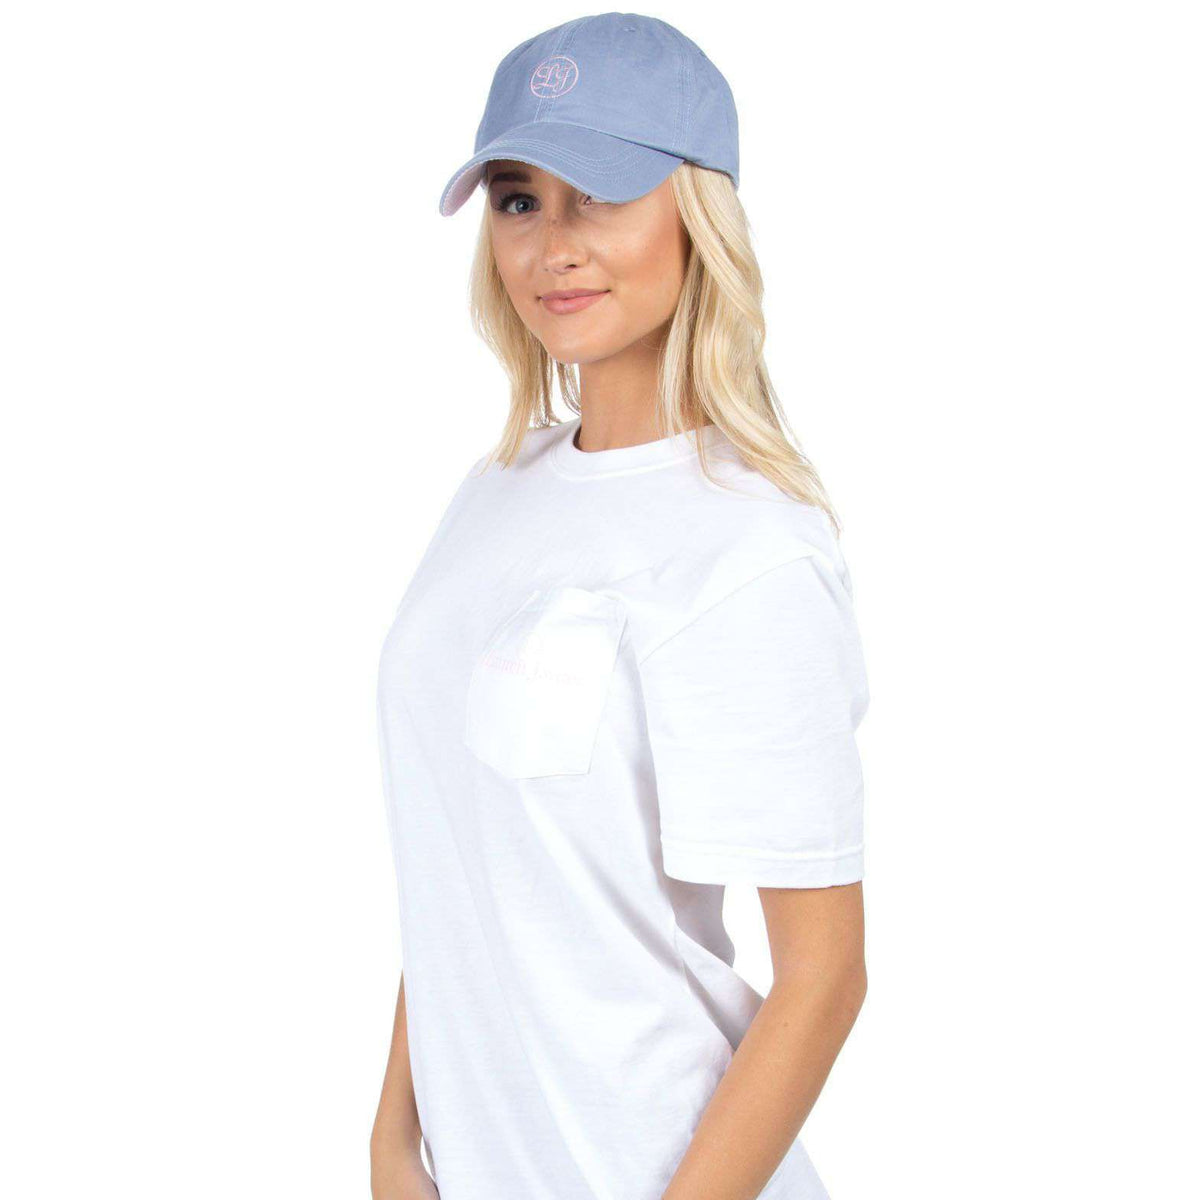 Baseball Hat in Light Blue by Lauren James - Country Club Prep